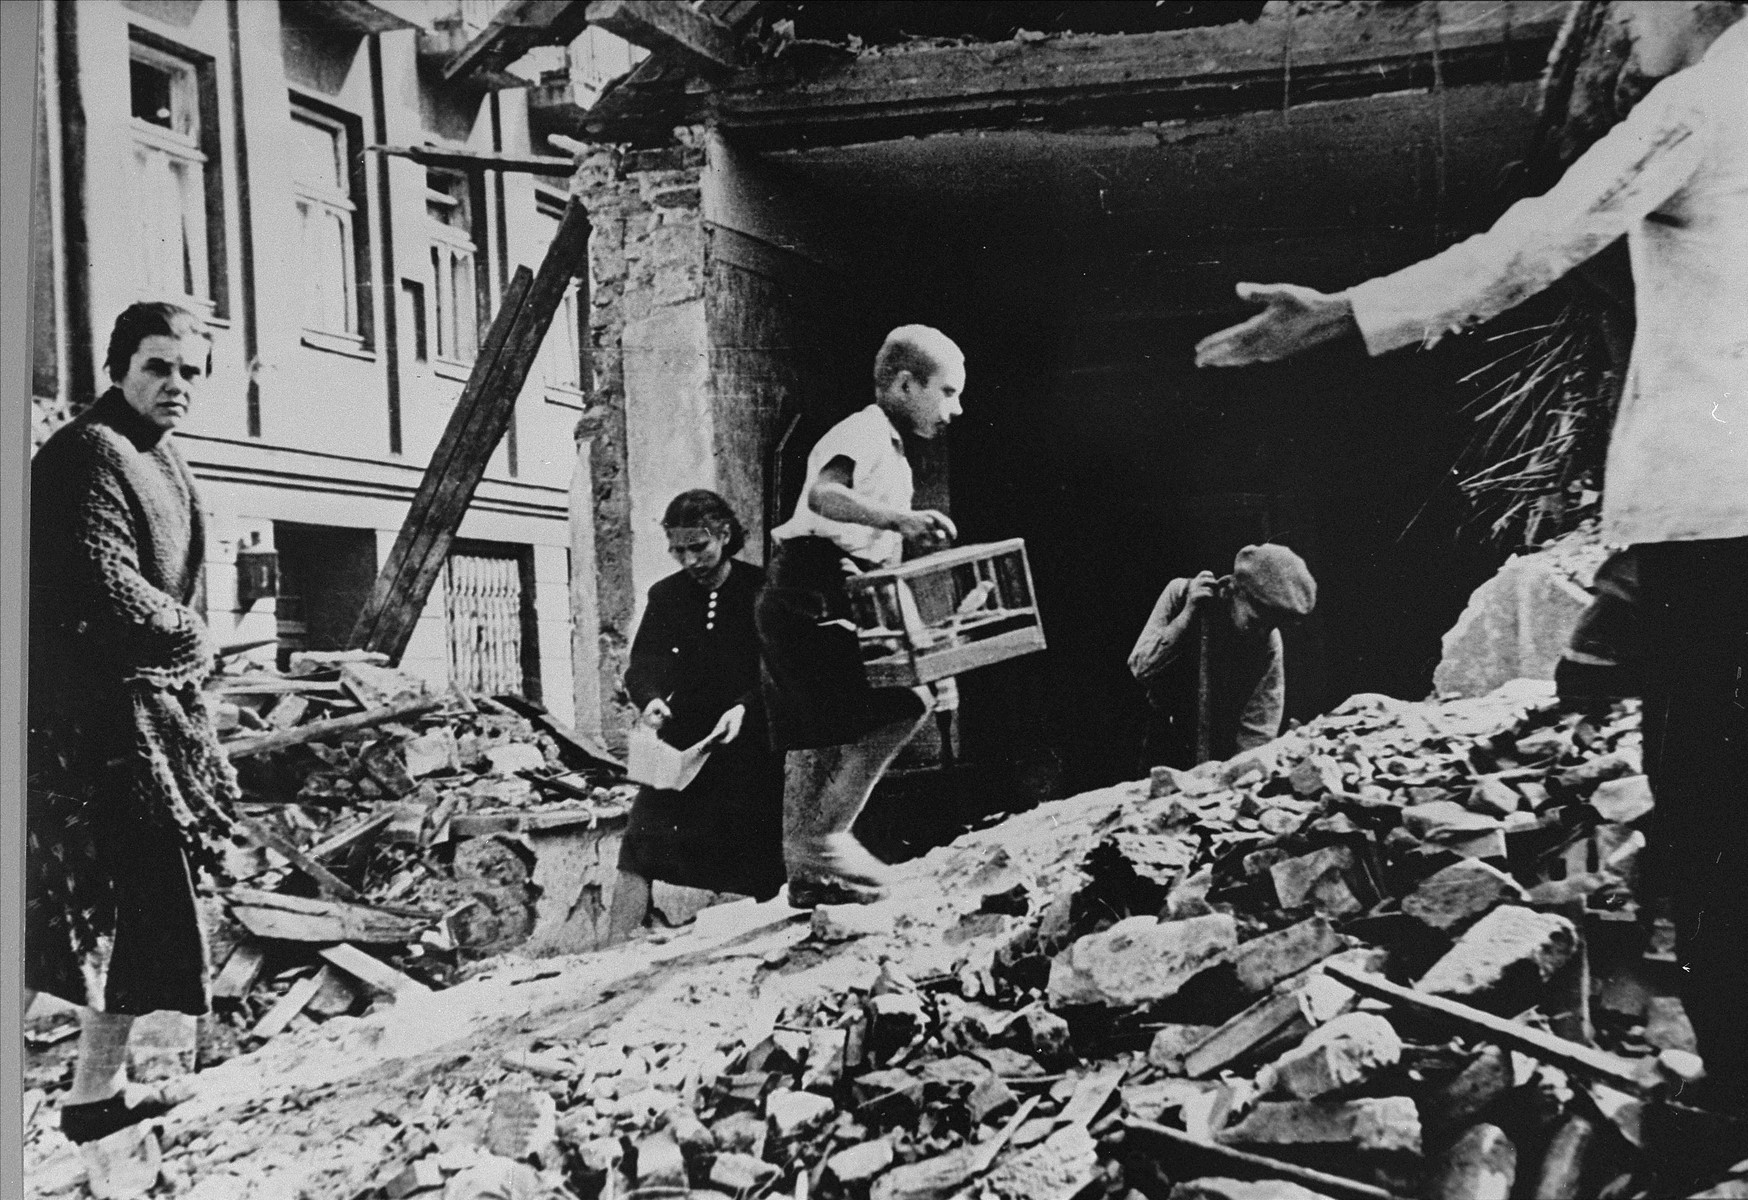 Polish civilians salvage items from the ruins of their homes in Warsaw after a German air raid. 

The child carrying the birdcage is Zygmunt Askienow.

In the words of photographer Julien Bryan, "Not far from the center of town a bomb had hit an apartment house and exposed the first, second, and third floors.  A boy was walking dazedly back and forth carrying the one possession he had found -- a canary in its cage.  He walked up and down over a pile of stones and bricks.  Under the pile there were nine or ten bodies, so the neighbors told us, not yet recovered." [Source: Bryan, Julien.  "Warsaw 1939 Siege, 1959 Warsaw Revisited."  Warsaw, Polonia, 1959, p. 24]